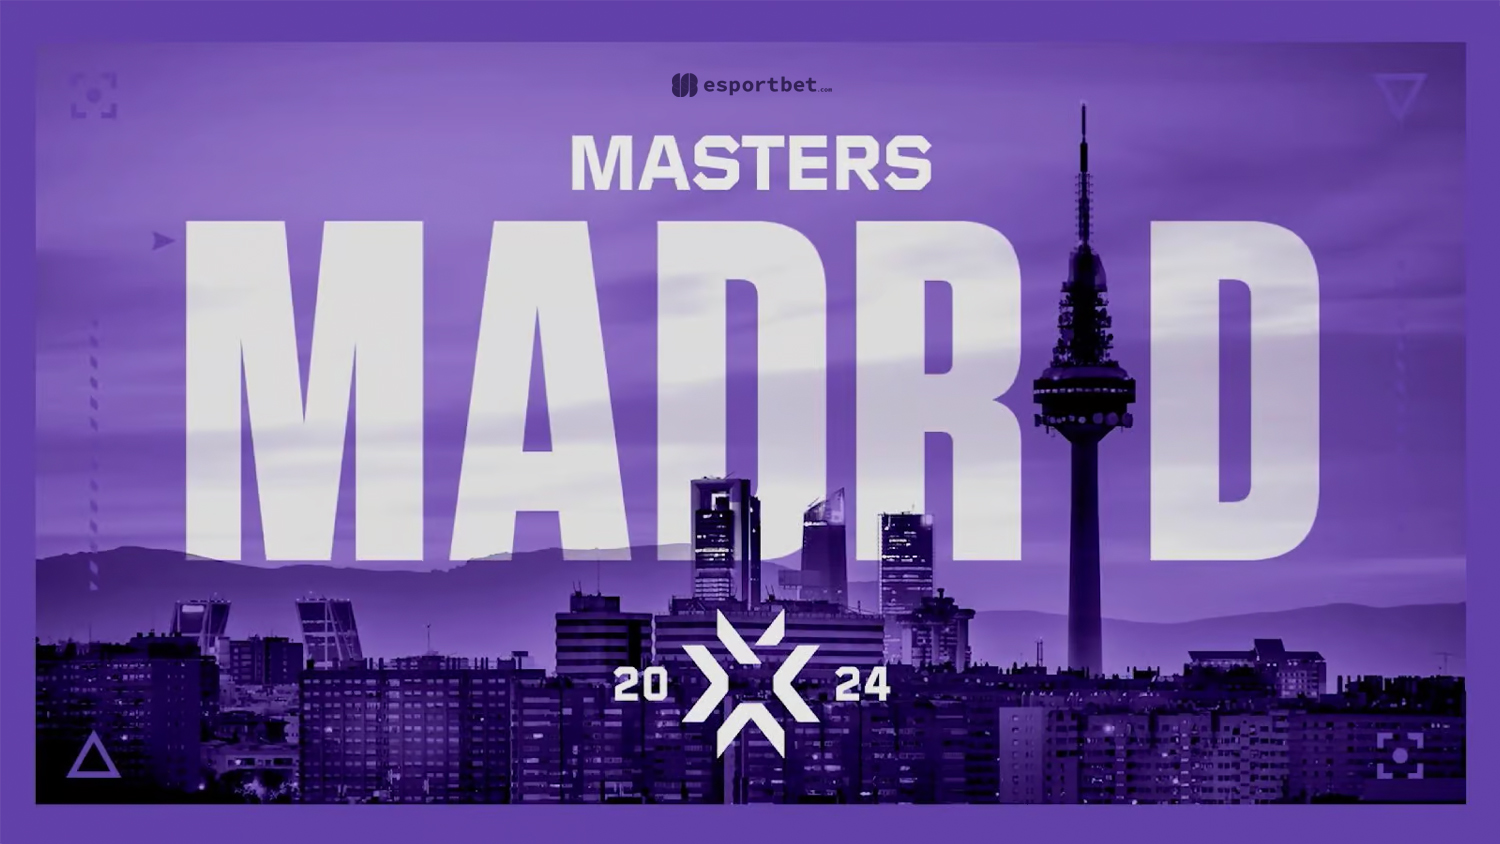 VCT Masters Madrid 2024